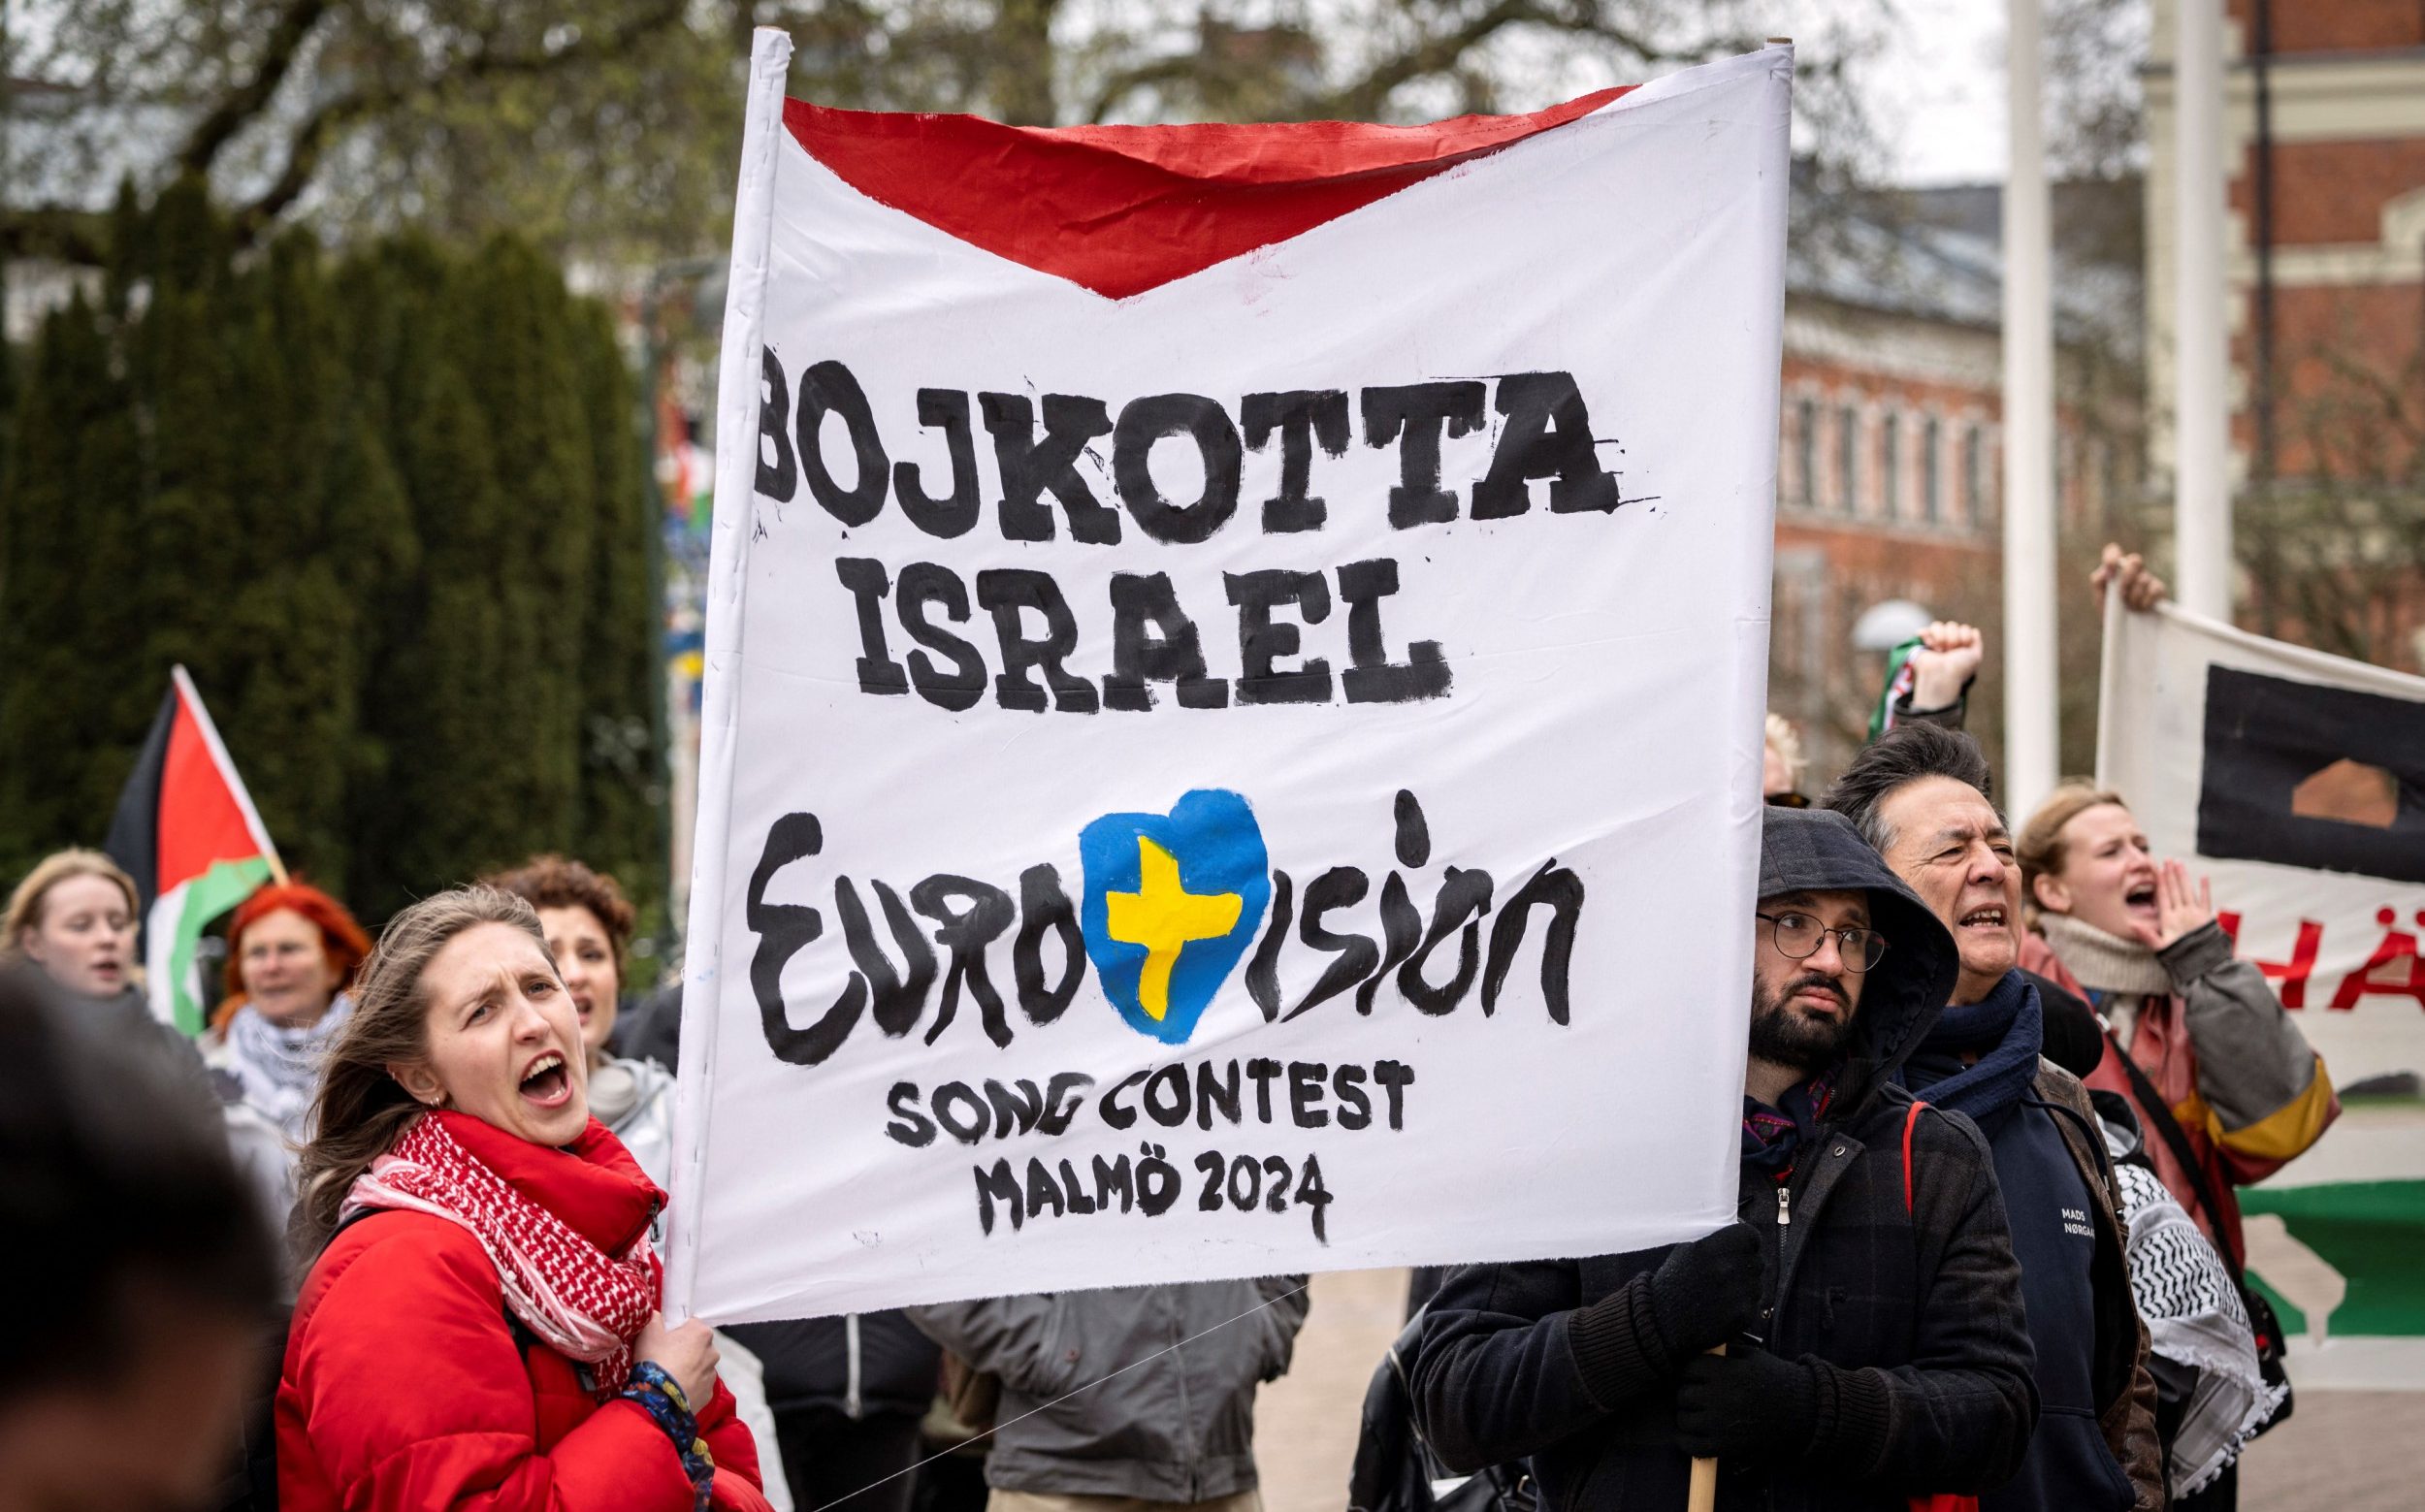 sweden boosts eurovision security ahead of anti-israel protests